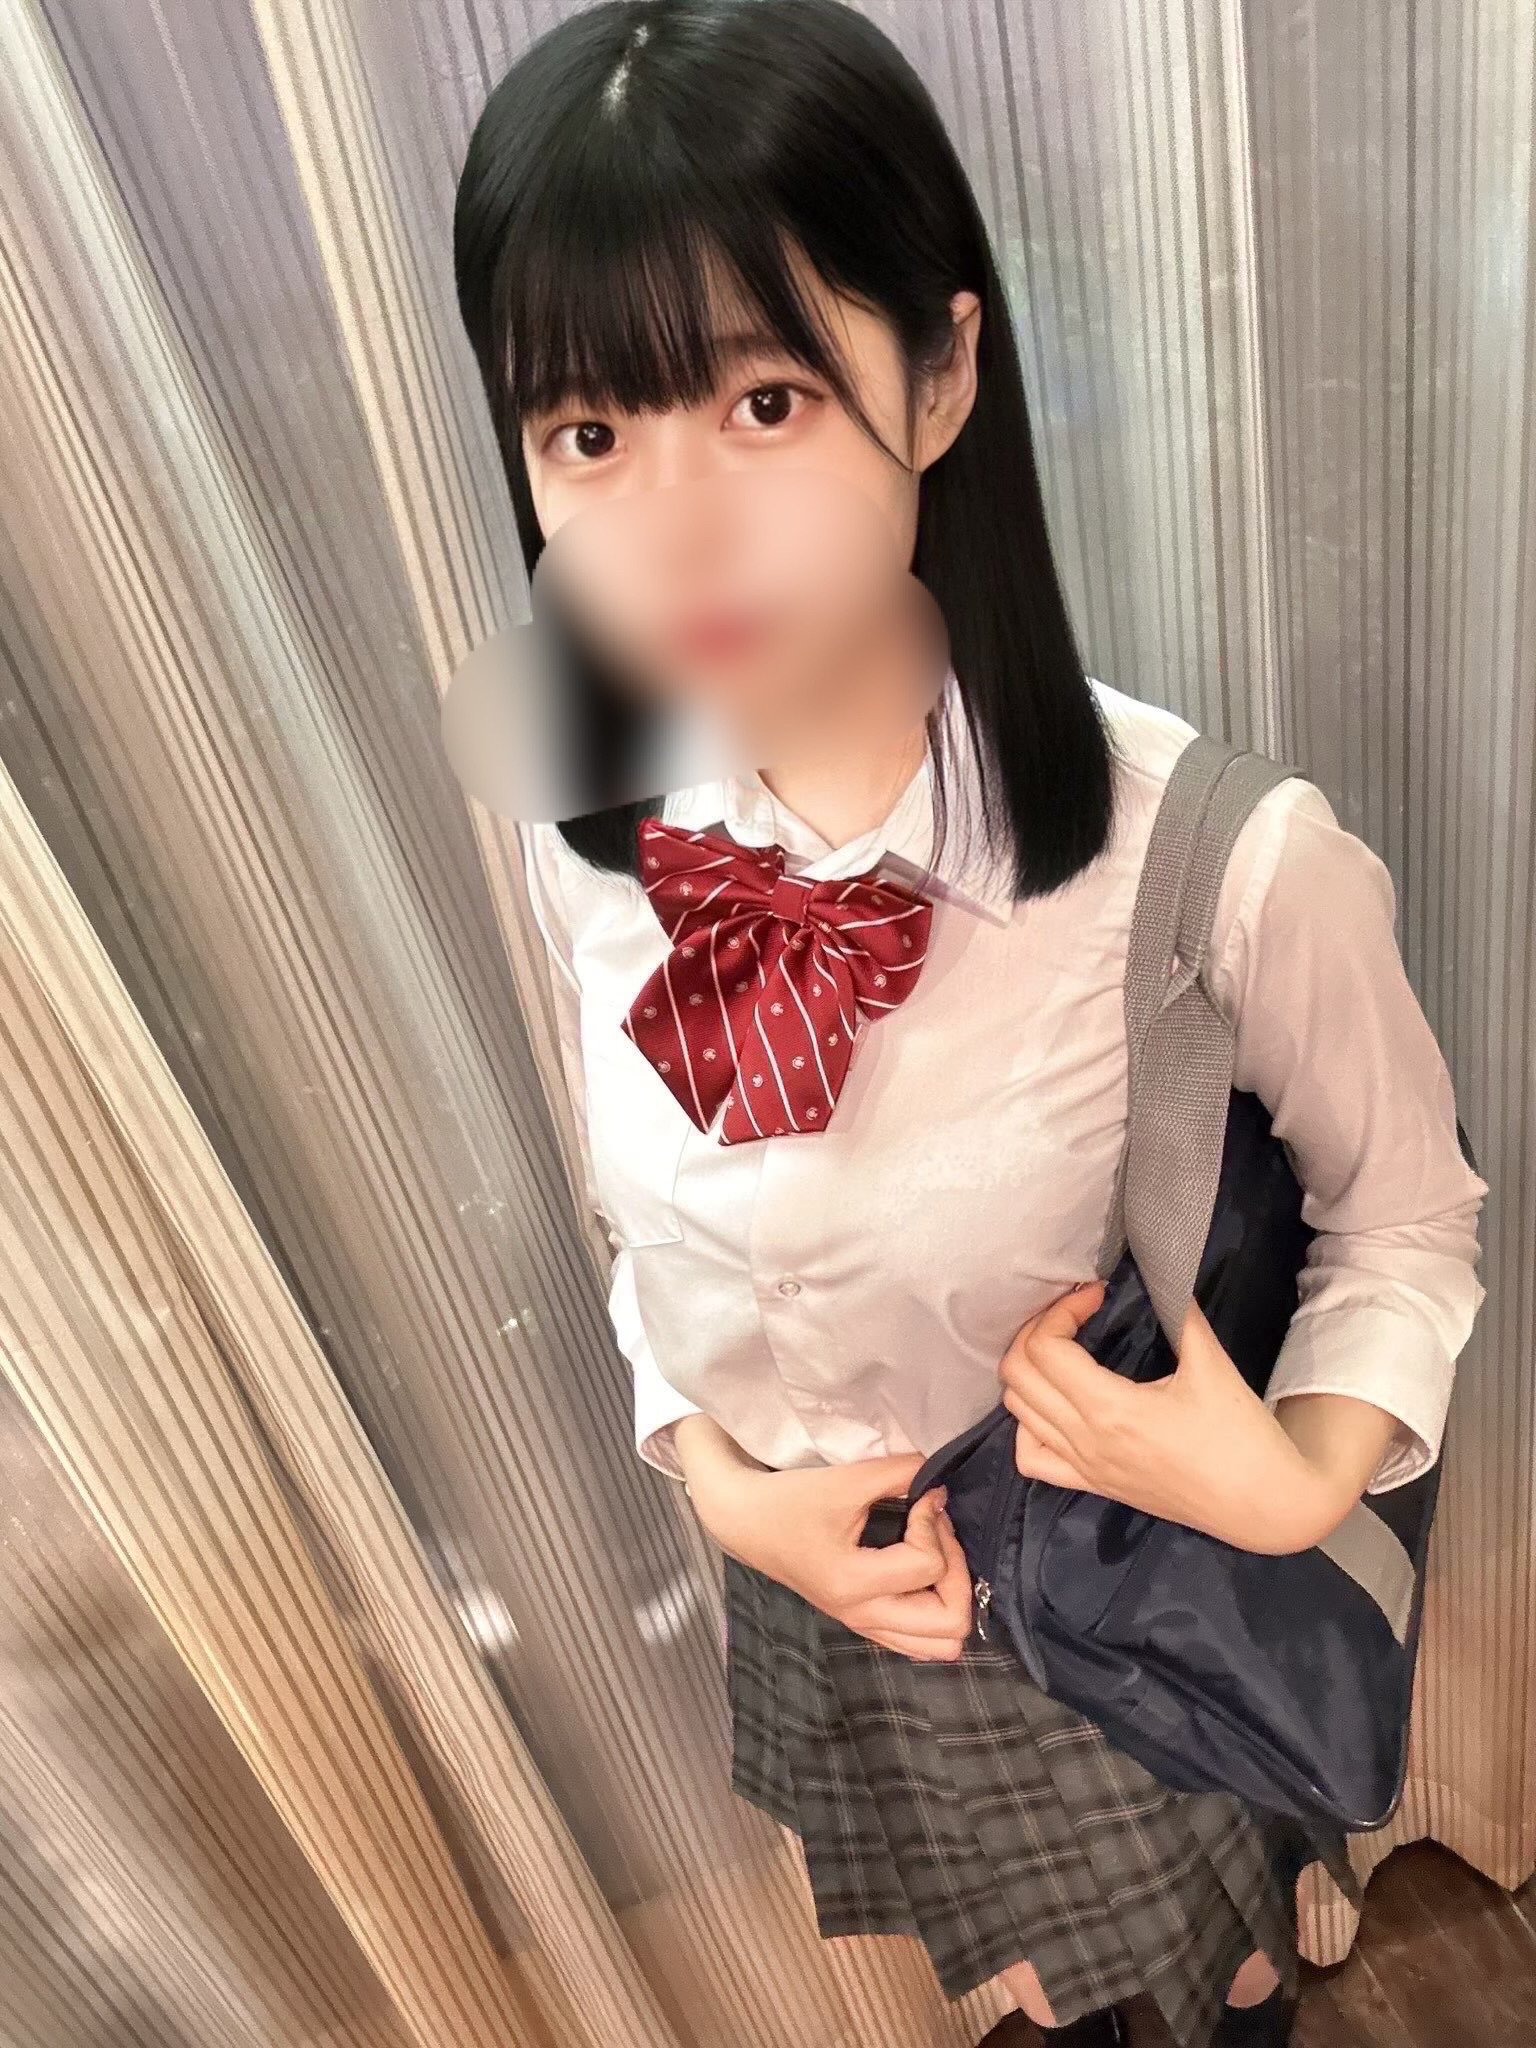 Urgent Limited Sale snonqyzj A Miraculous Superb Slender Beauty 18-Year-Old E-Cup Riku-chan Got A First Time Vaginal Cum Shot In Her Young And Undeveloped Body